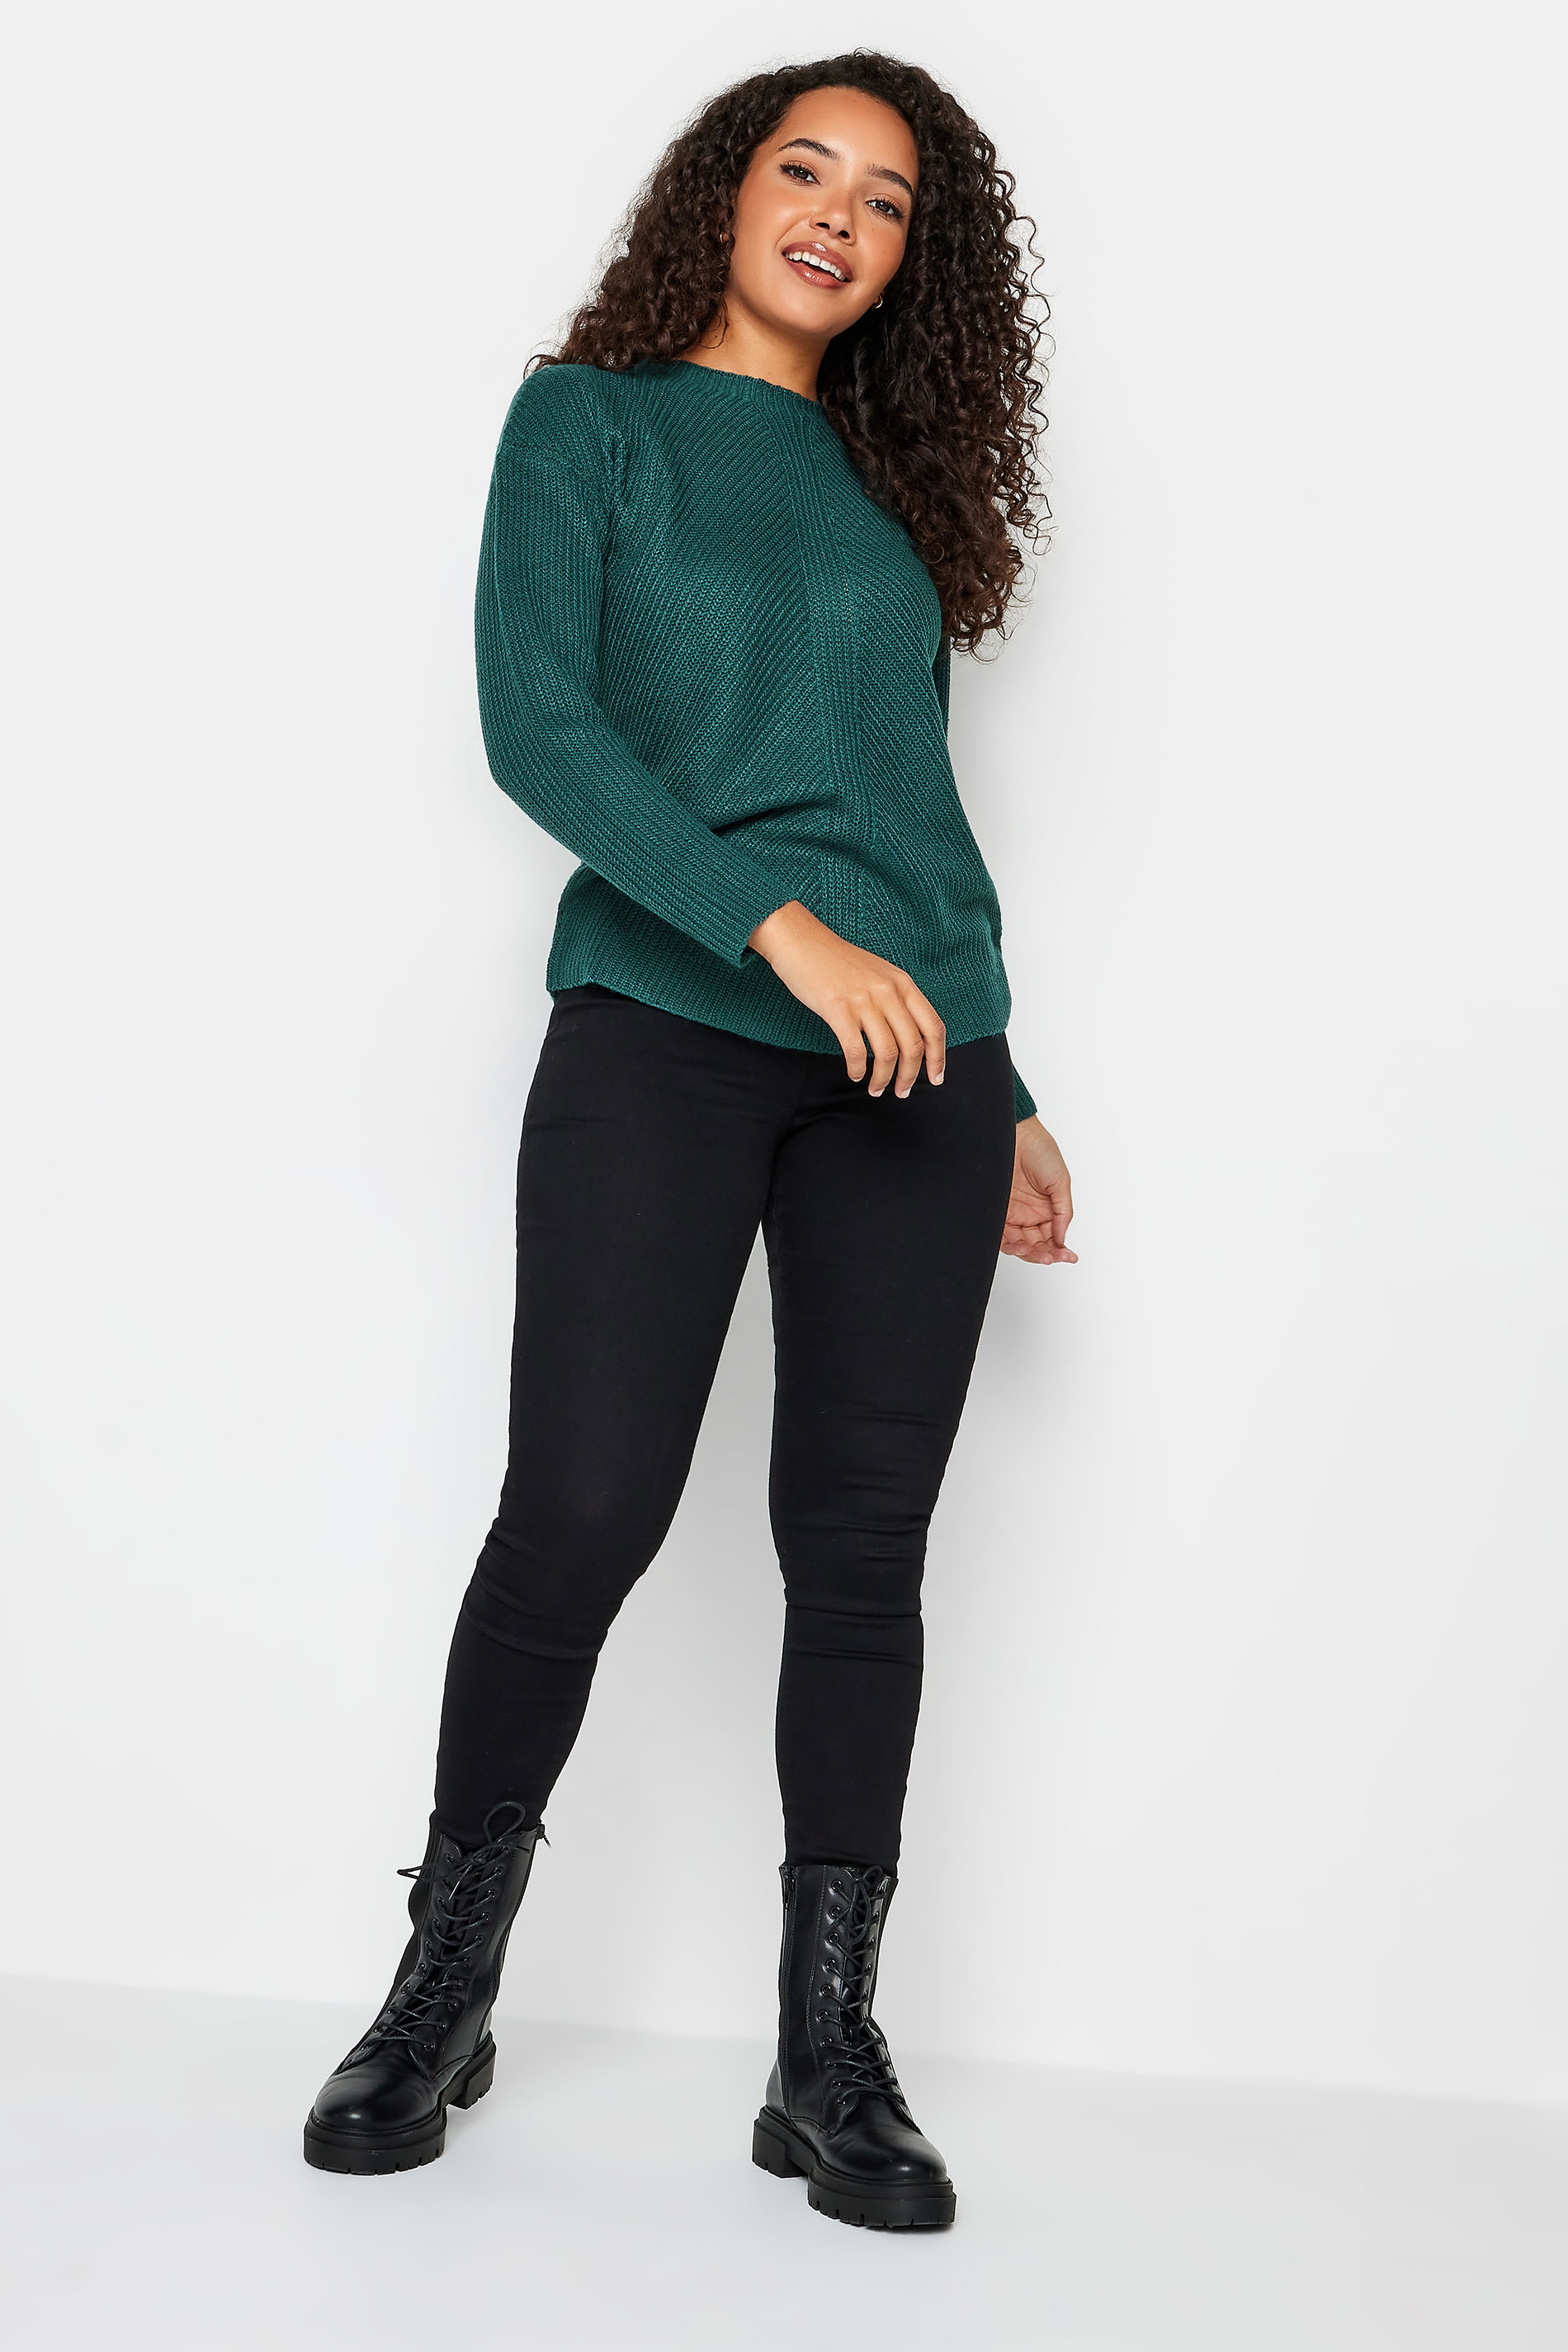 M&Co Teal Green Funnel Neck Knitted Jumper | M&Co 2